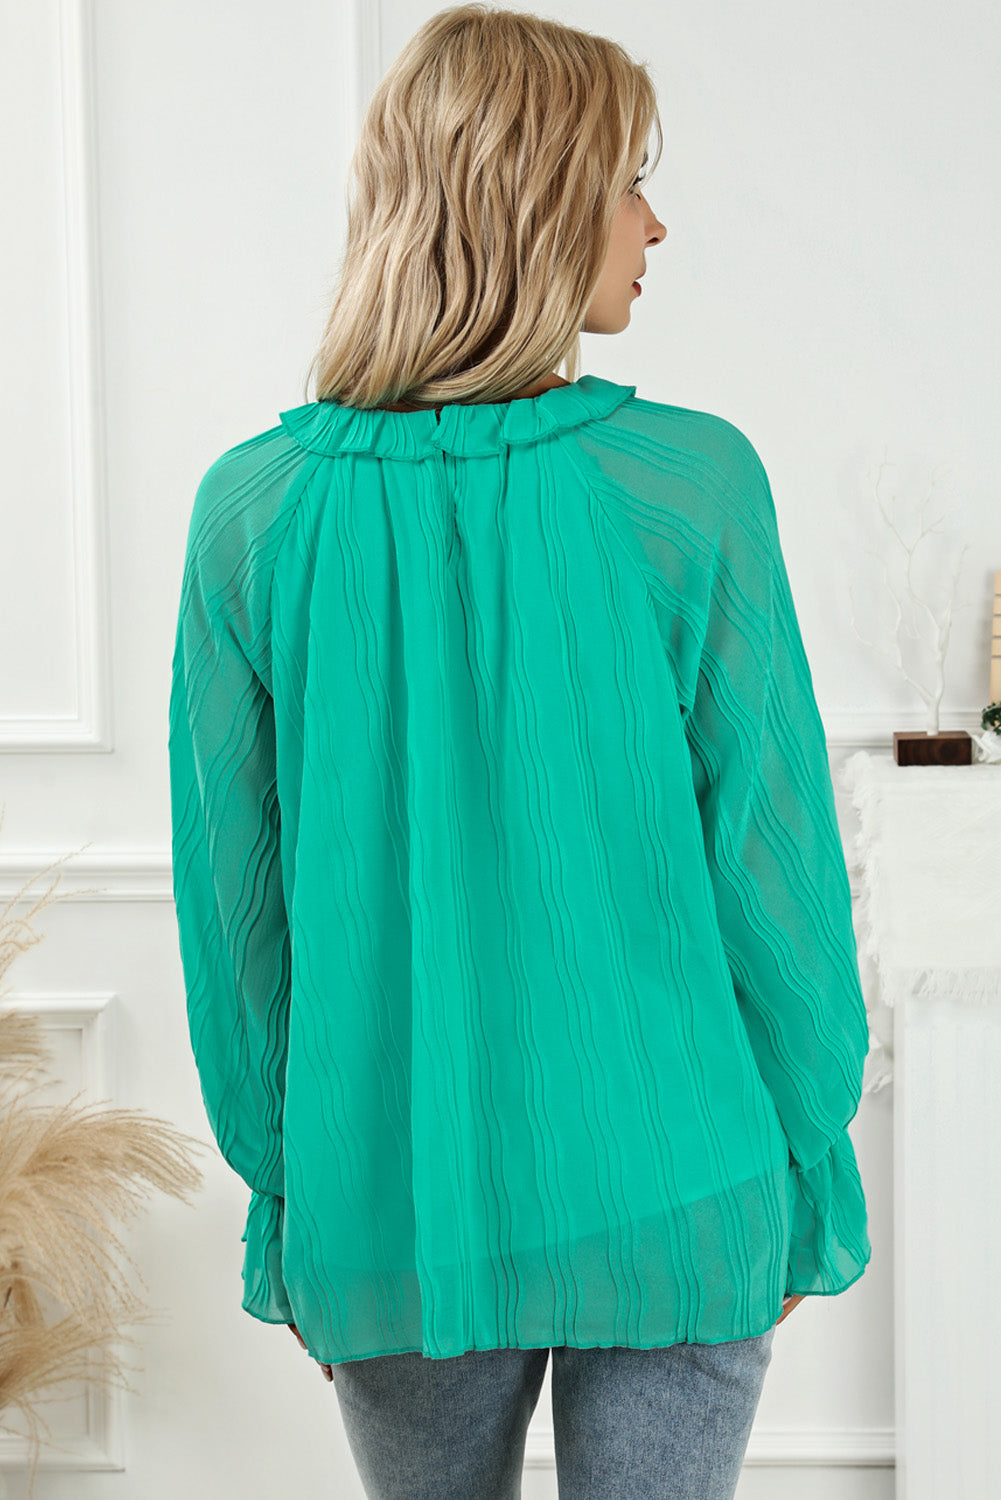 LC25121763-9-S, LC25121763-9-M, LC25121763-9-L, LC25121763-9-XL, Green Striking Pleated Flared Cuff Long Sleeve Blouse